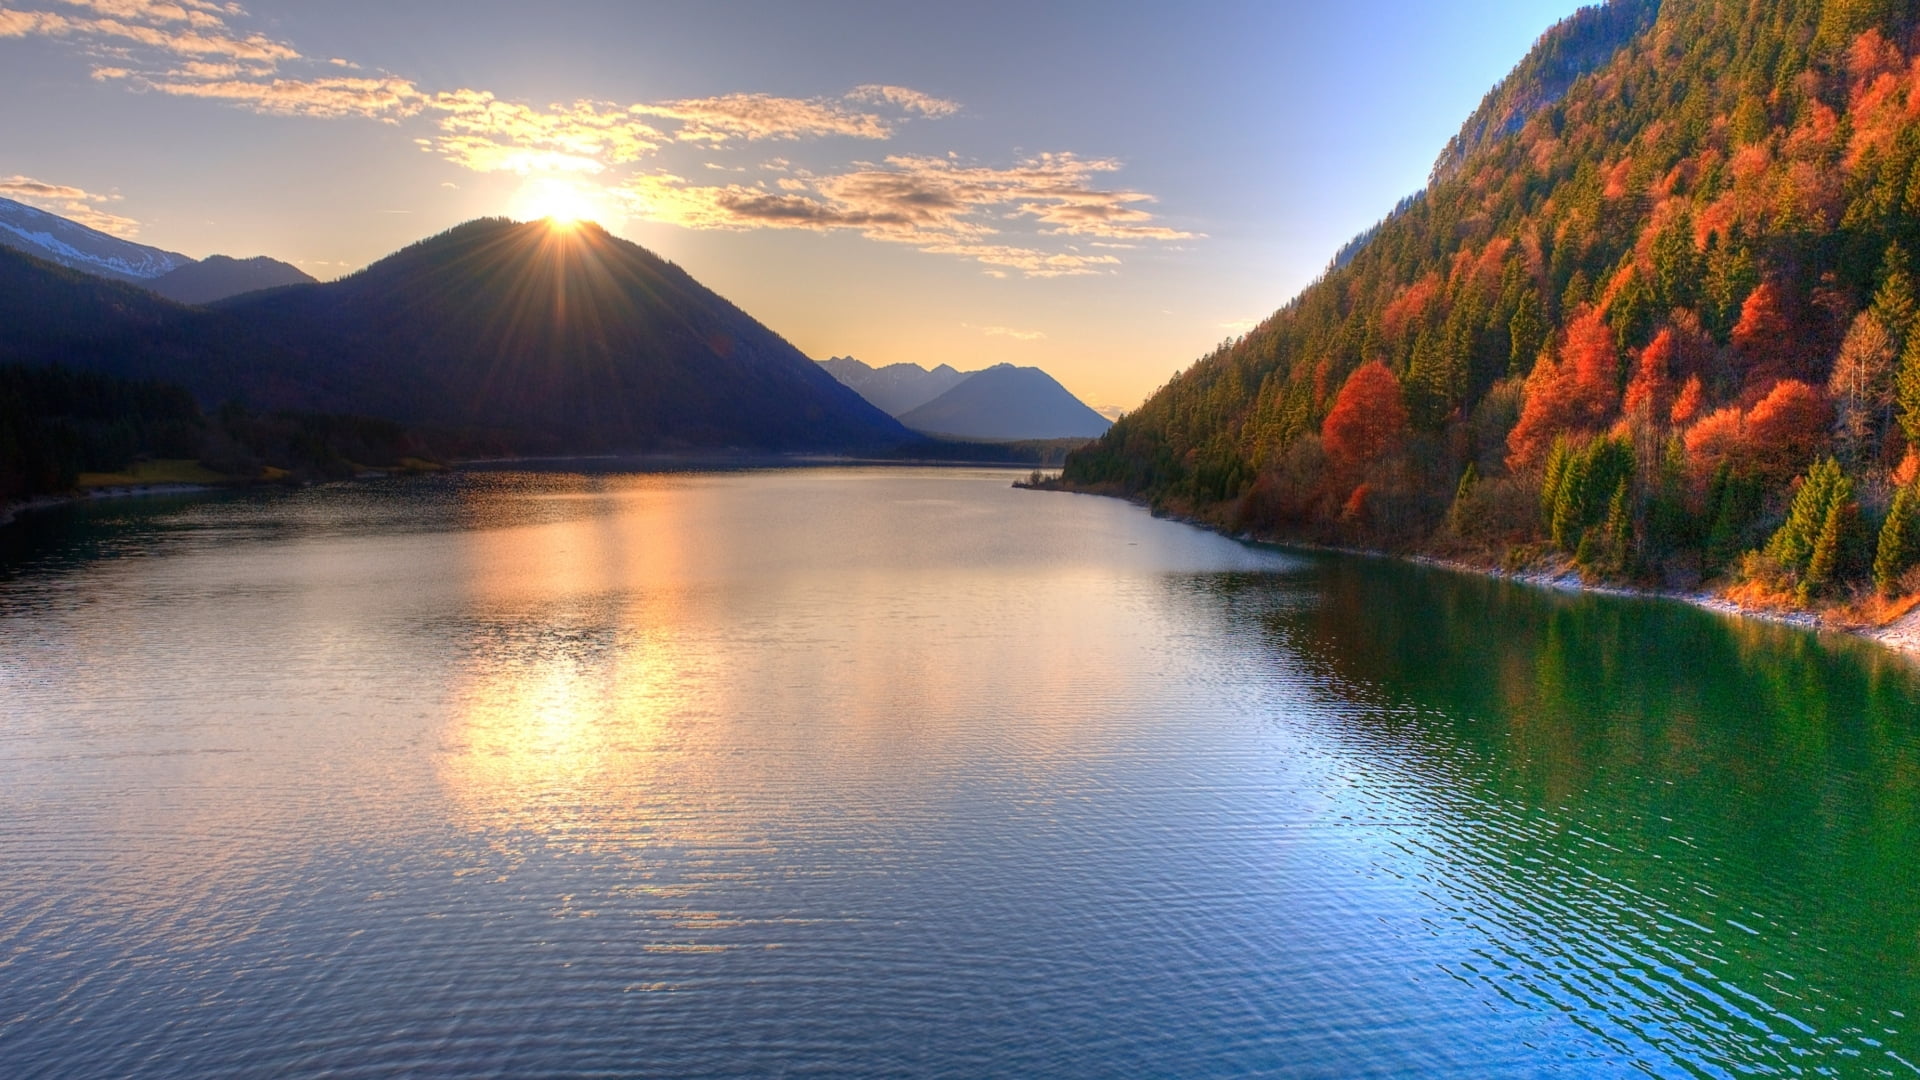 Landscape Photography Of Mountain Near Body Of Water During Daytime Hd